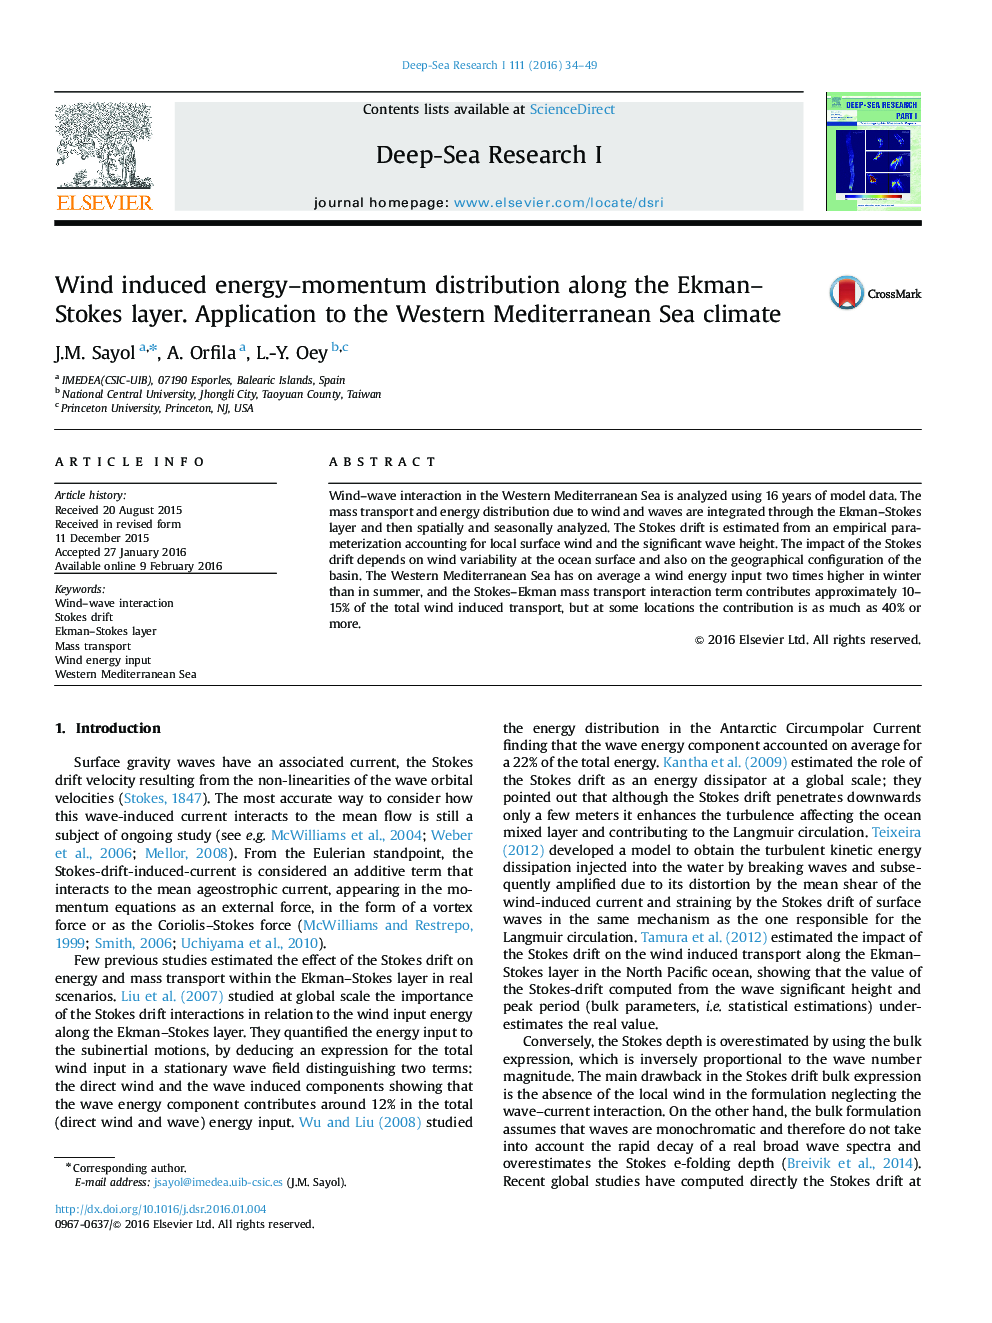 Wind induced energy–momentum distribution along the Ekman–Stokes layer. Application to the Western Mediterranean Sea climate